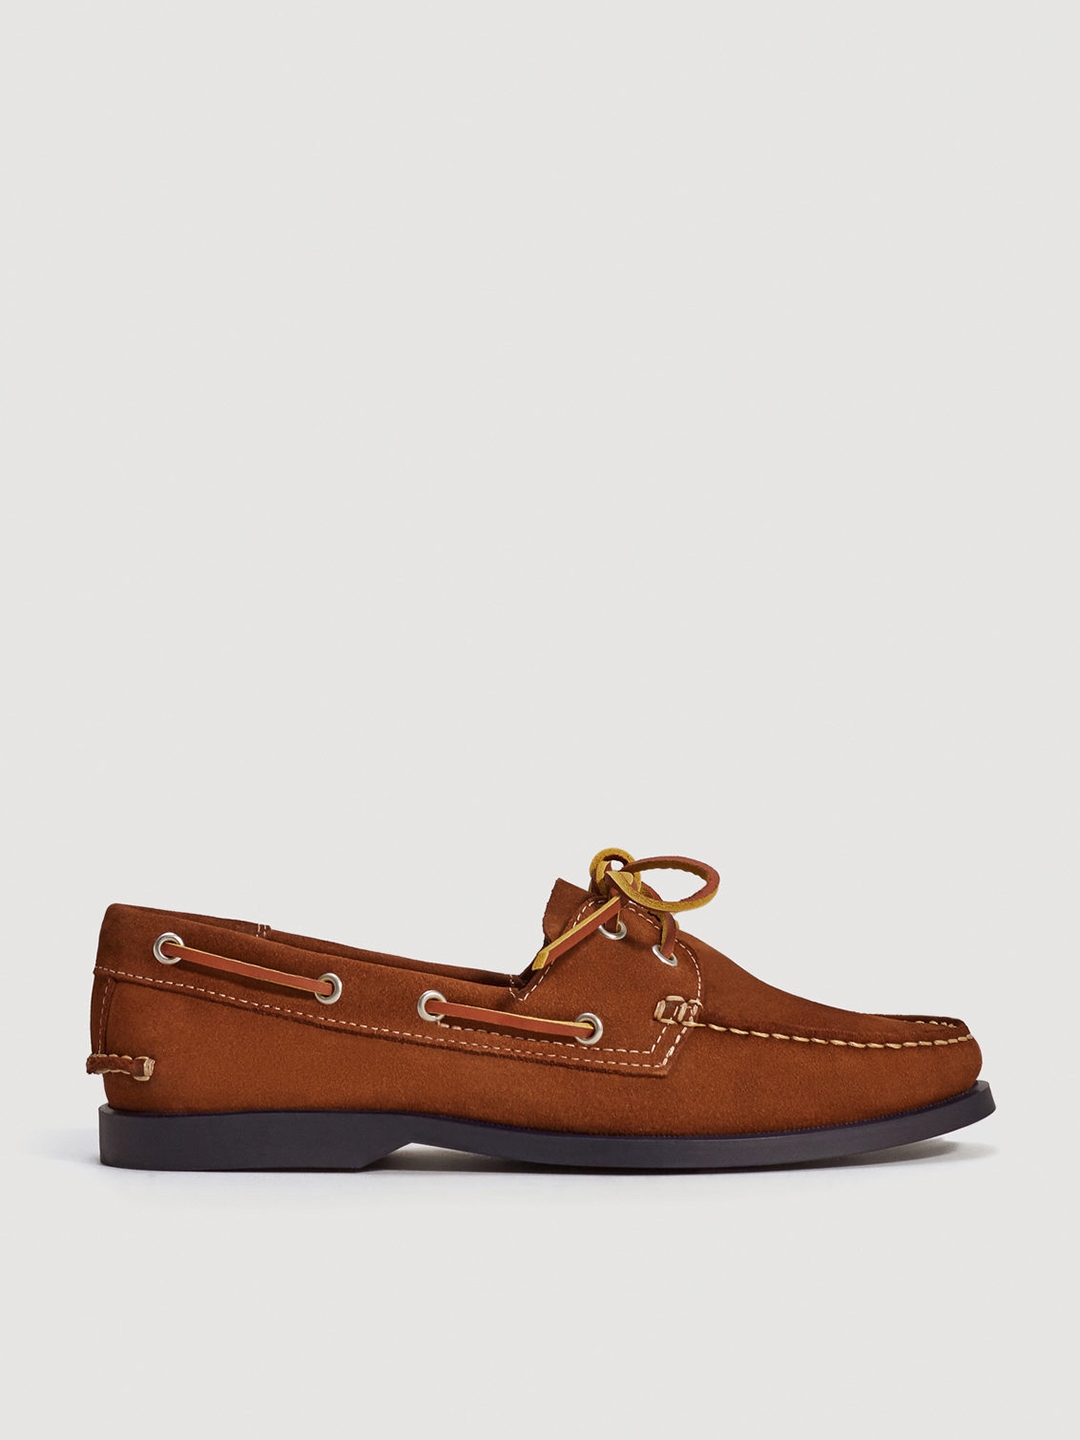 Mens Shoes Slip-on shoes Boat and deck shoes Brown Mango Leather Boat Shoes in Leather for Men 